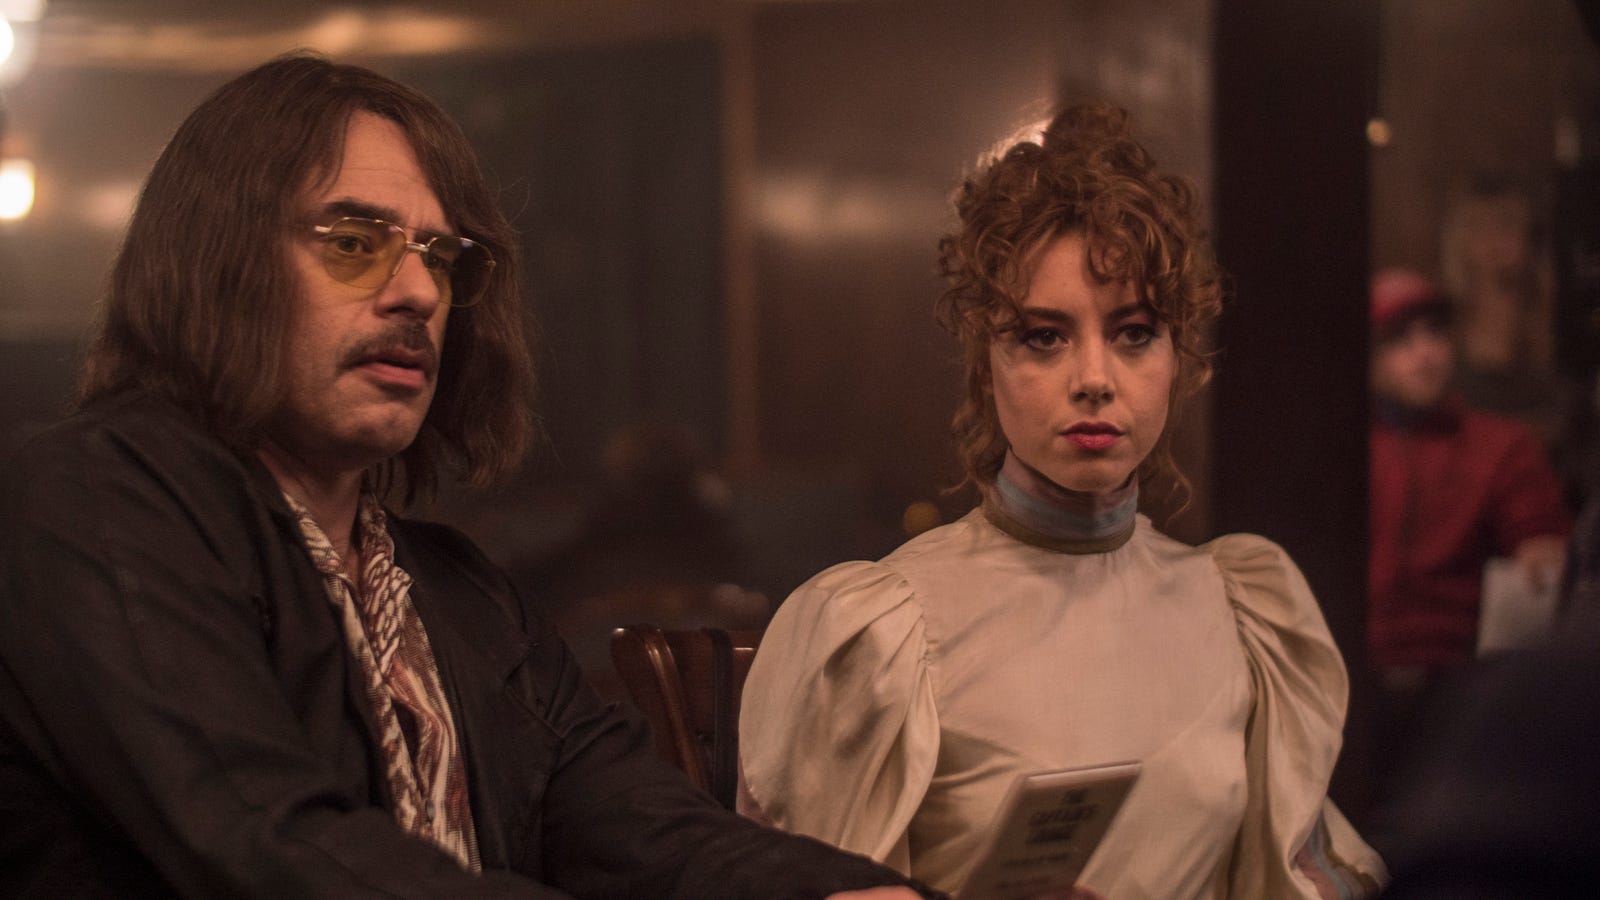 Aubrey Plaza leads a parade of bad taste and noir misfits in An Evening